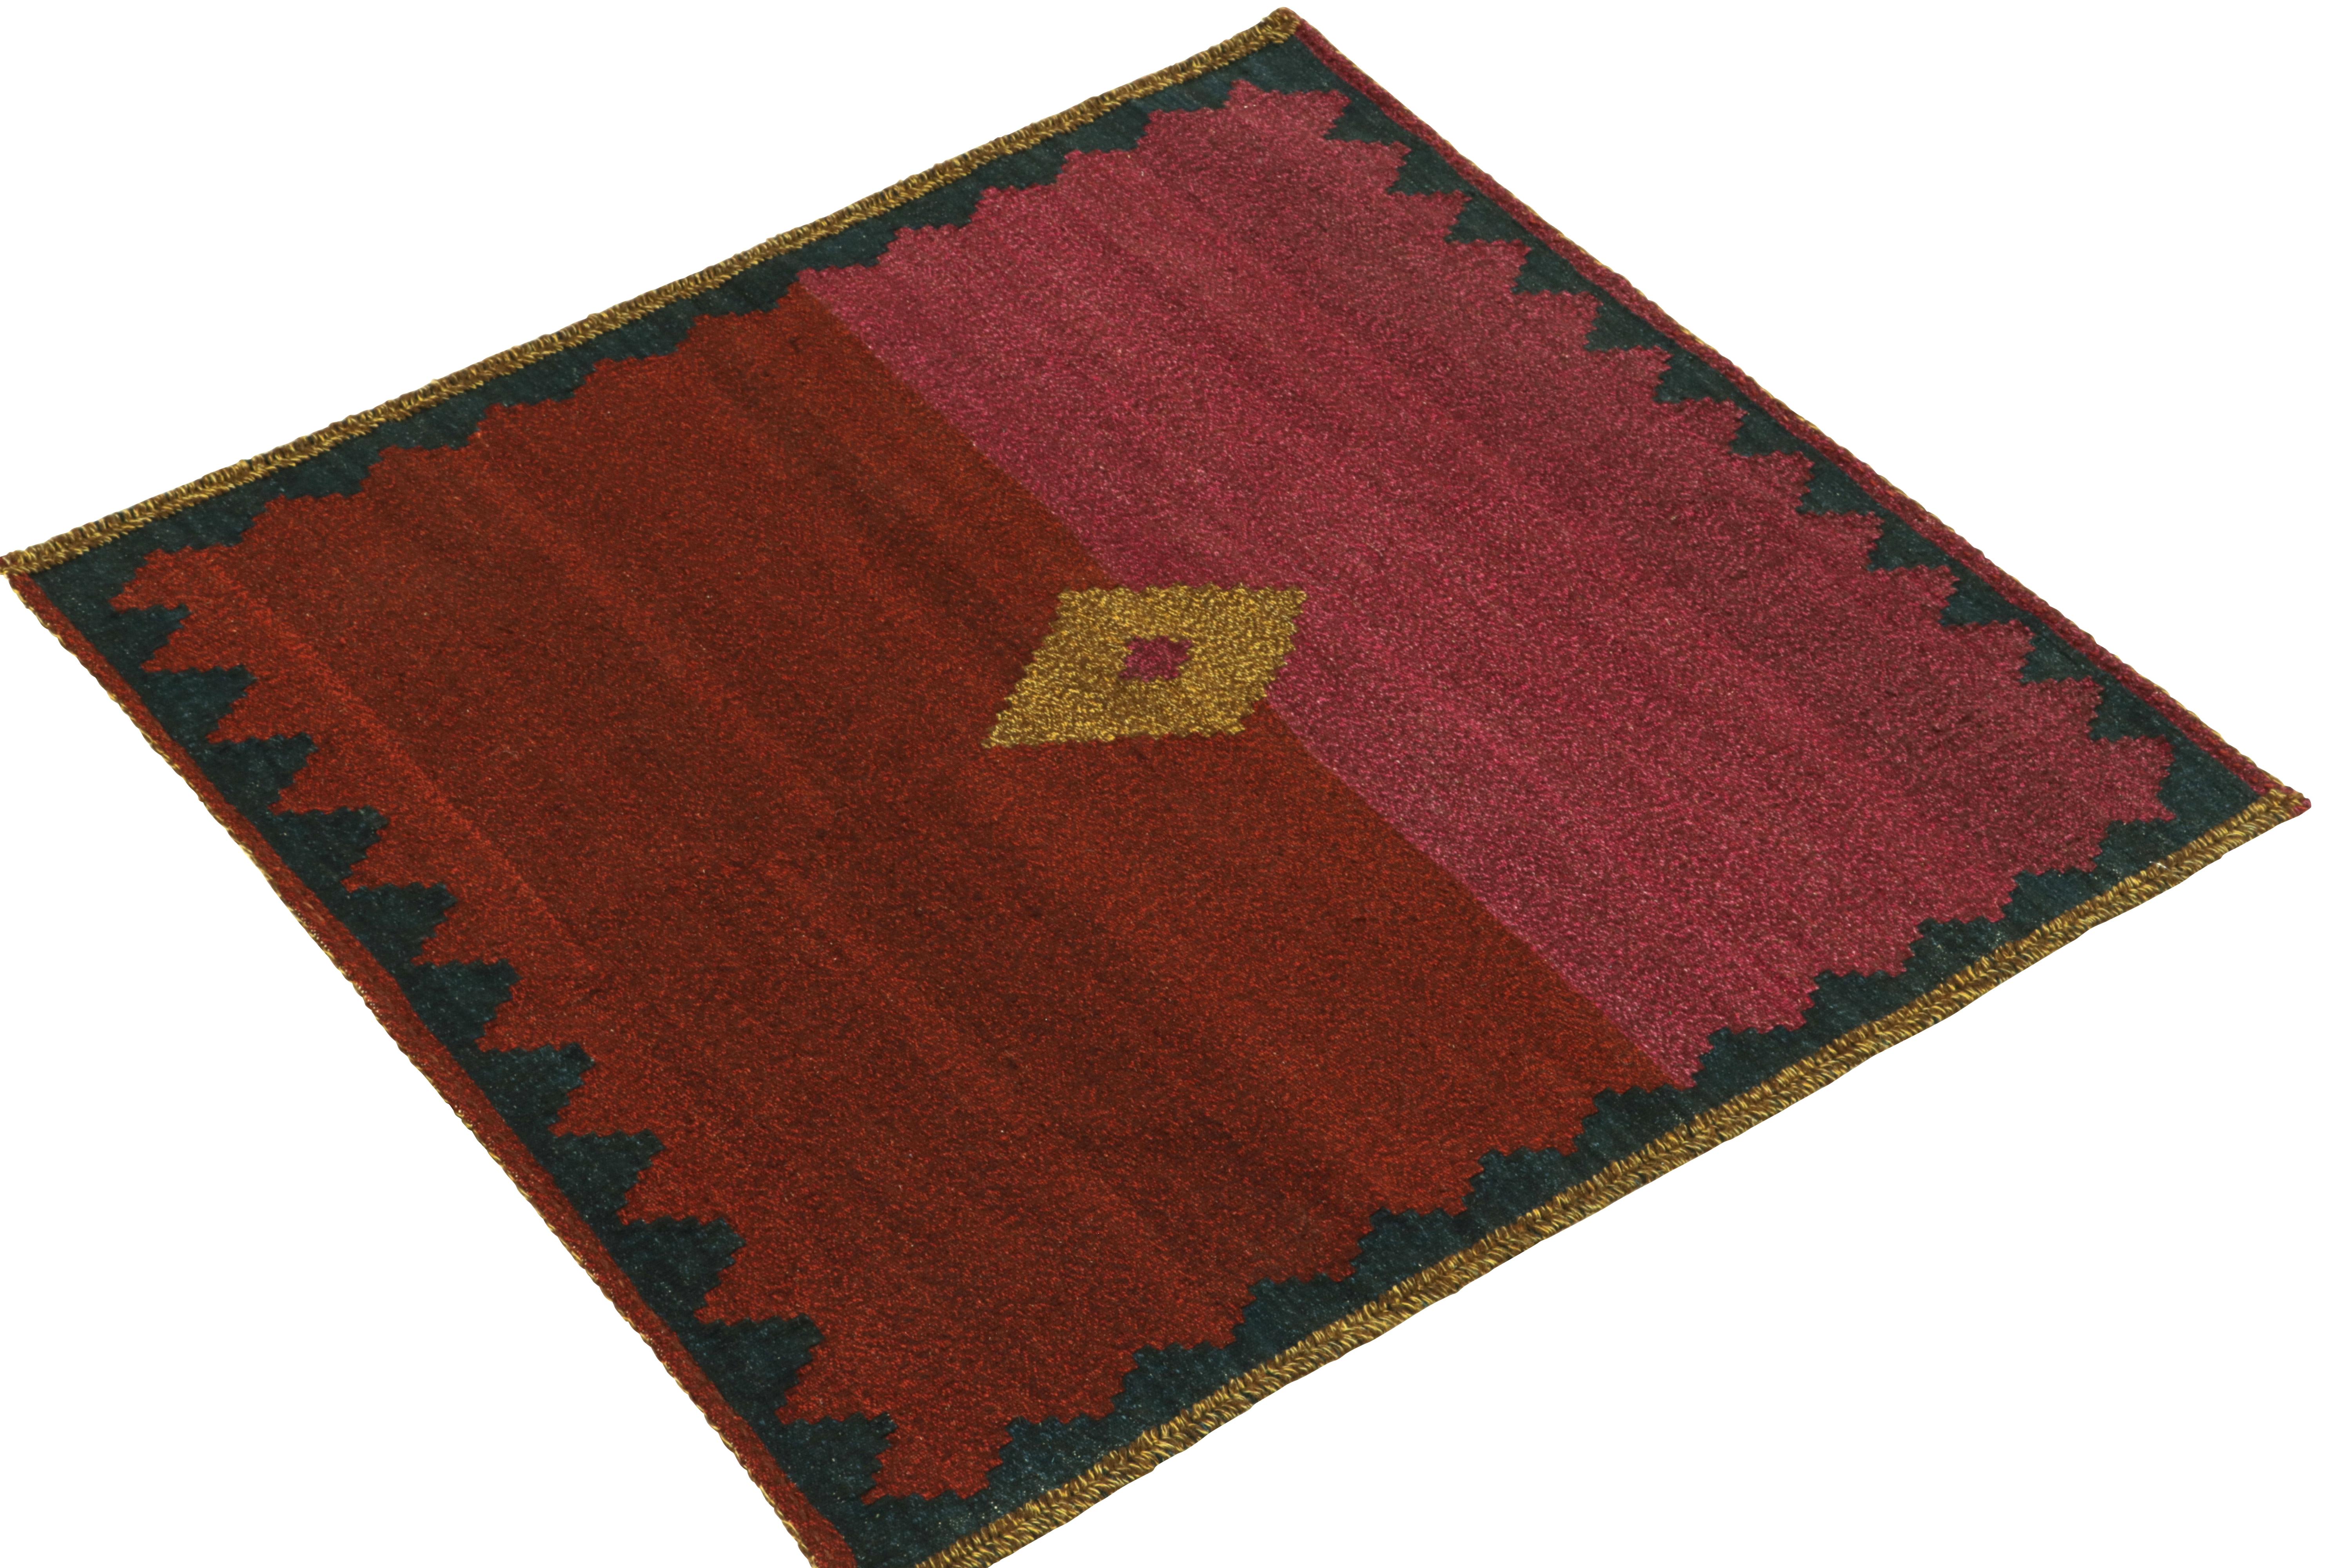 Tribal 1950s Vintage Kilim Rug in Red, Yellow Diamond Medallion Pattern by Rug & Kilim For Sale